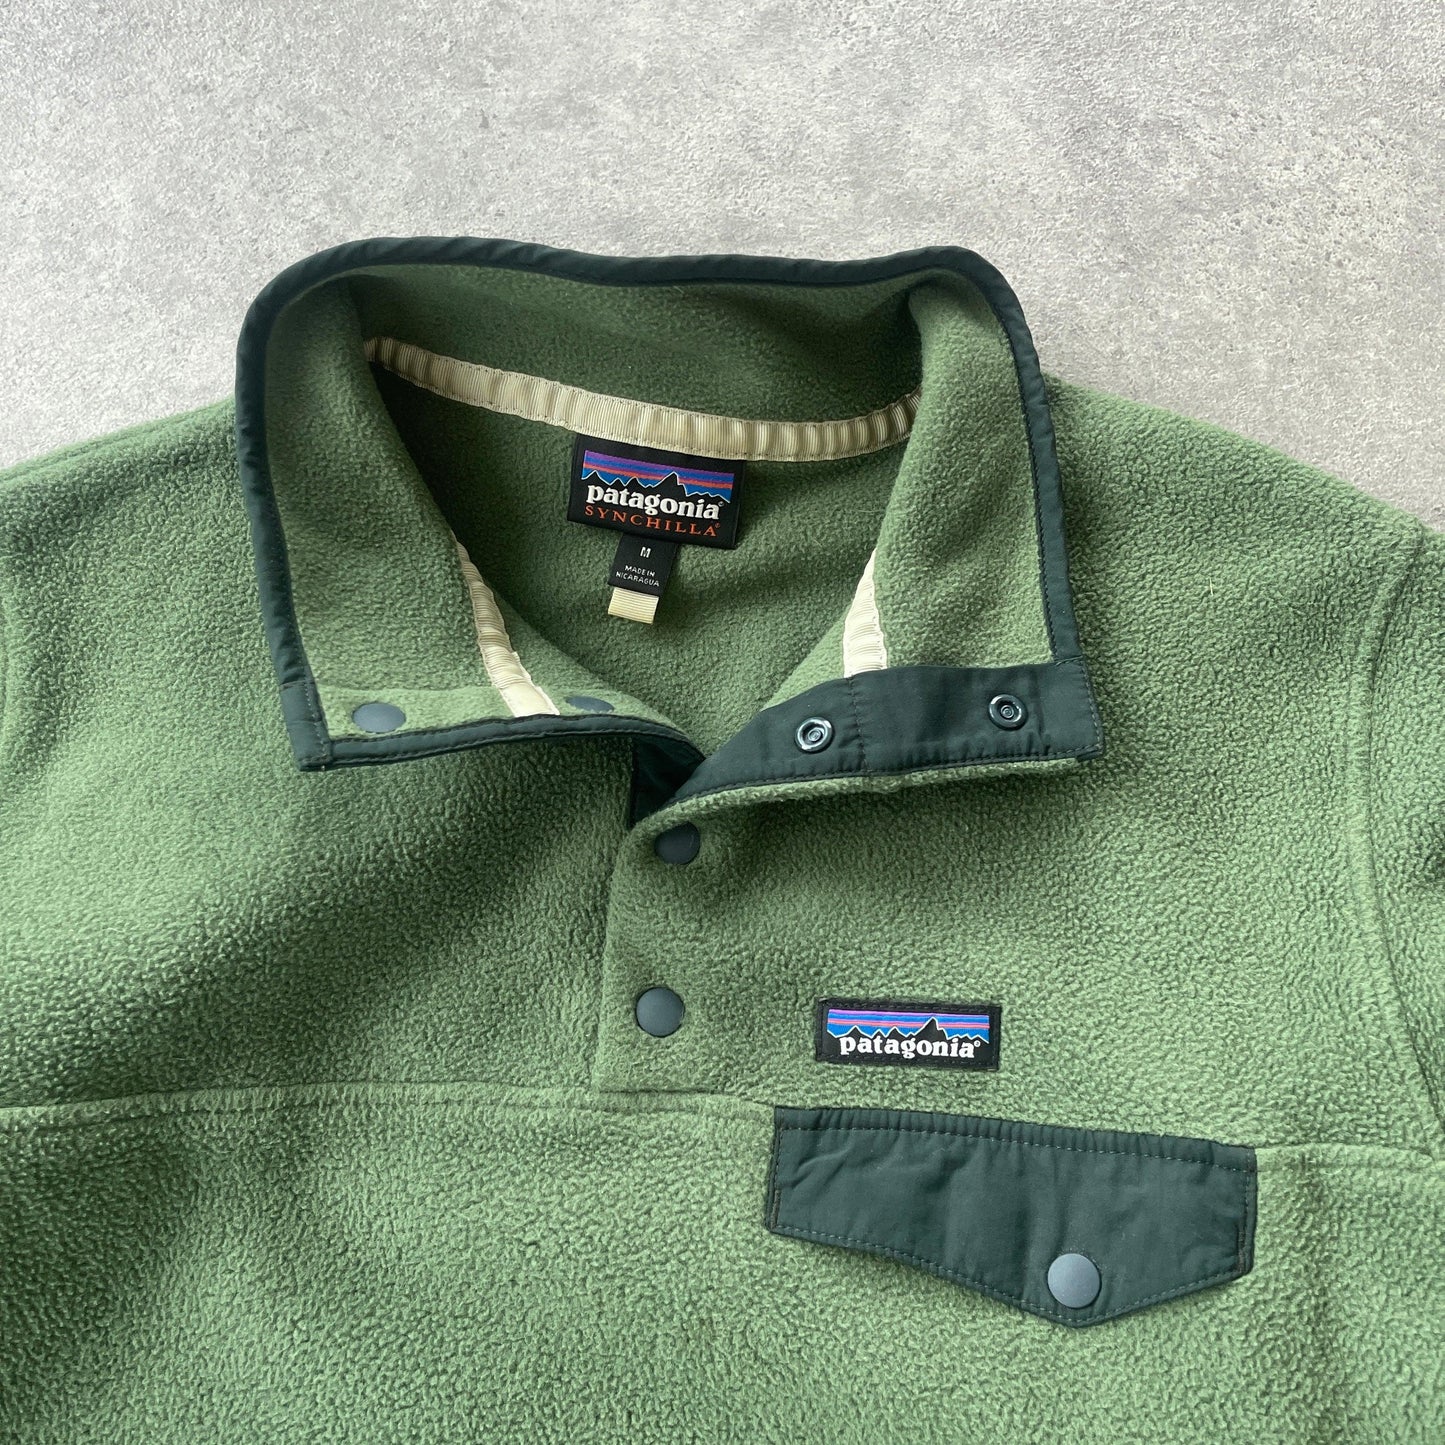 Patagonia Synchilla 2000s Snap-T pullover fleece (M) - Known Source